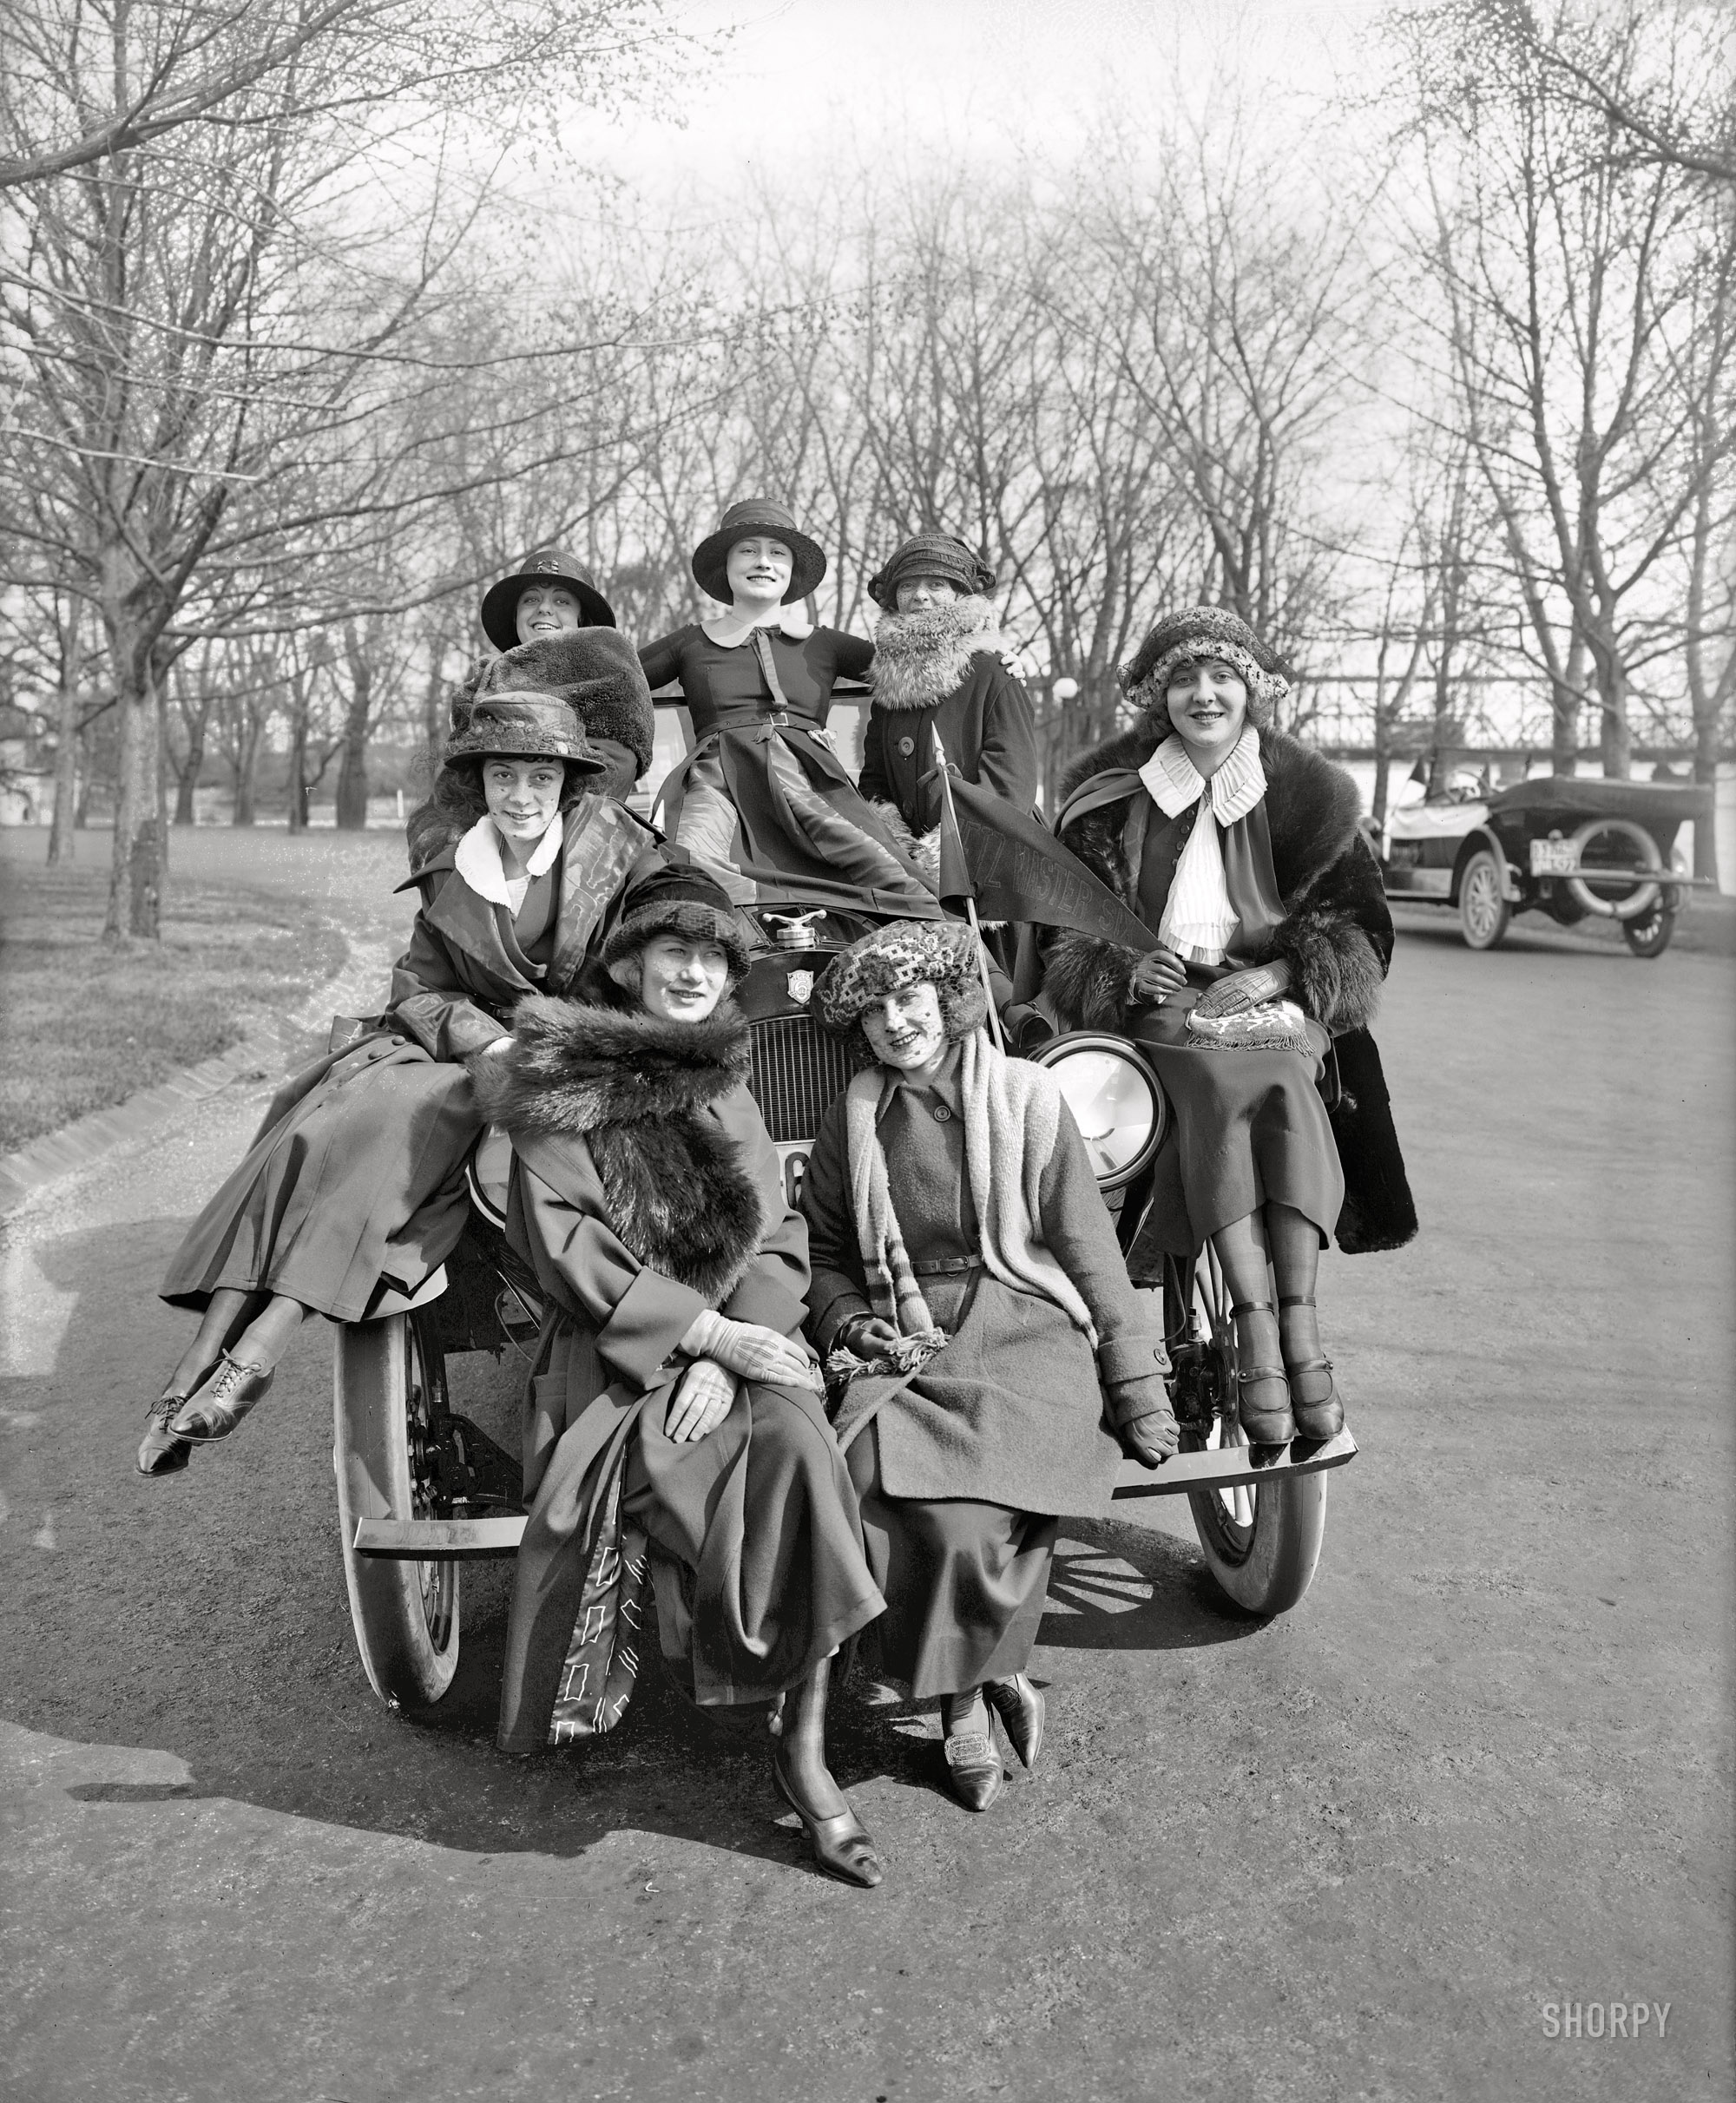 Washington, D.C., circa 1920. "Lanza Motor Co. -- Greenwich Village Girls." Somewhere under this mass of pulchritude is the Metz Master Six automobile. National Photo Company Collection glass negative. View full size.